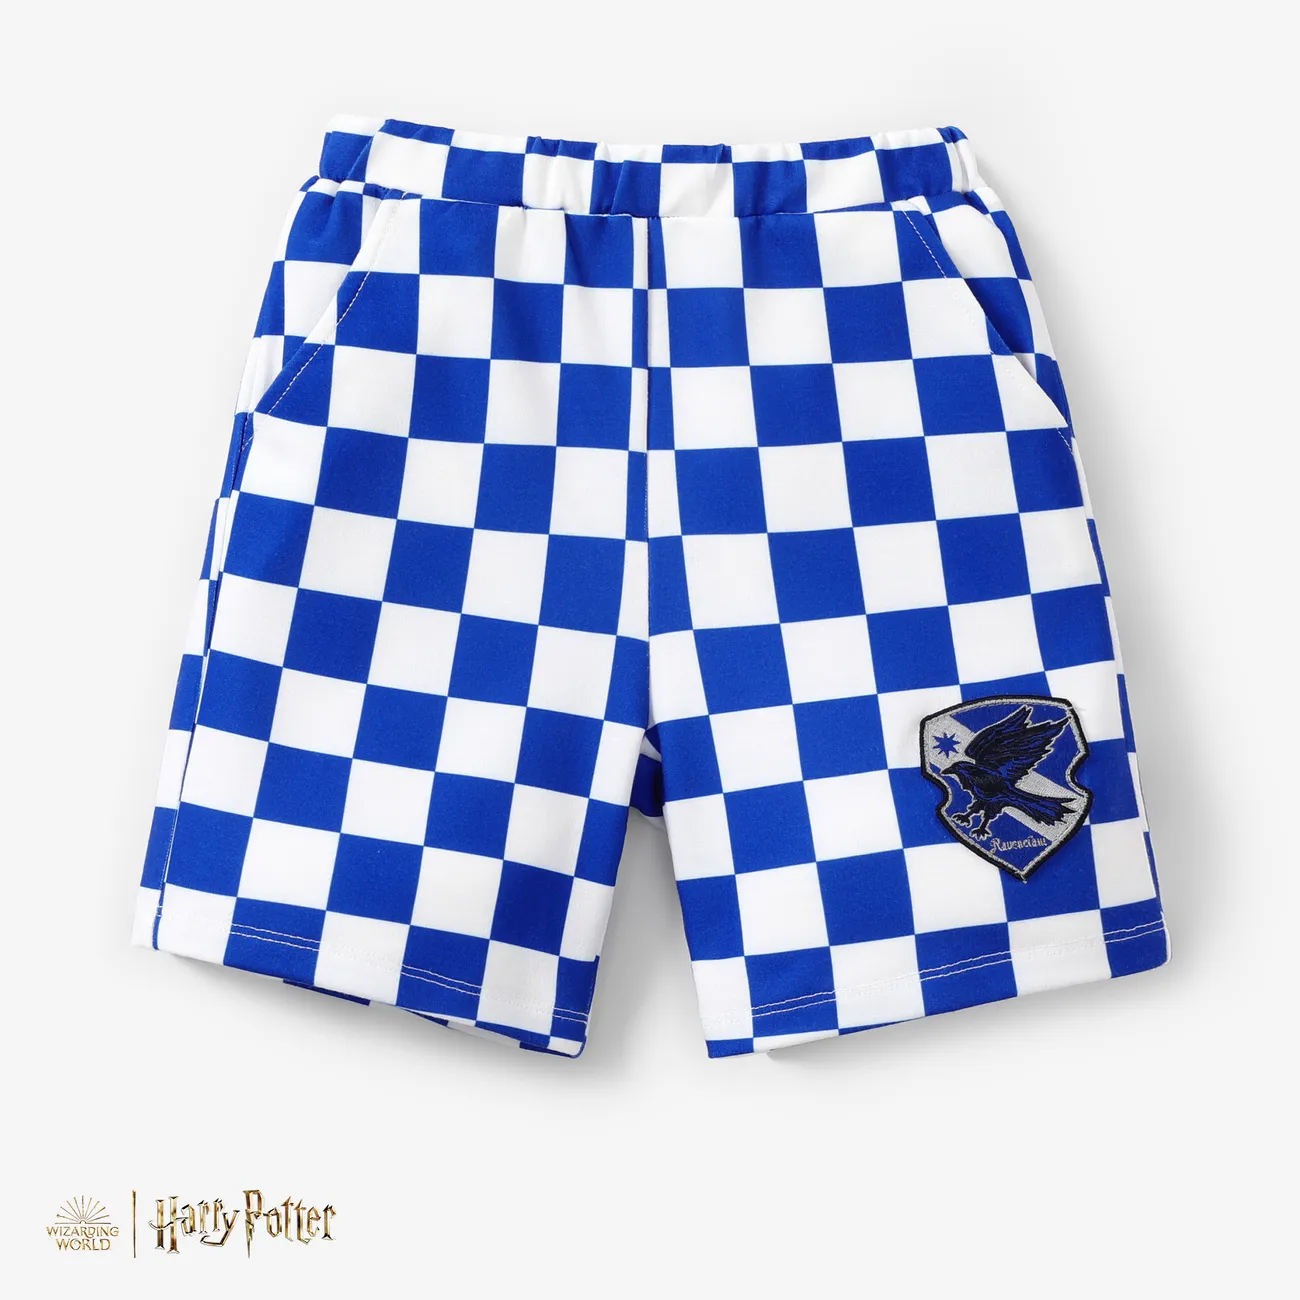 Harry Potter Toddler/Kid Boy 1pc Chess Grid pattern Preppy style Polo Shirt or Shorts
 BLUEWHITE big image 1